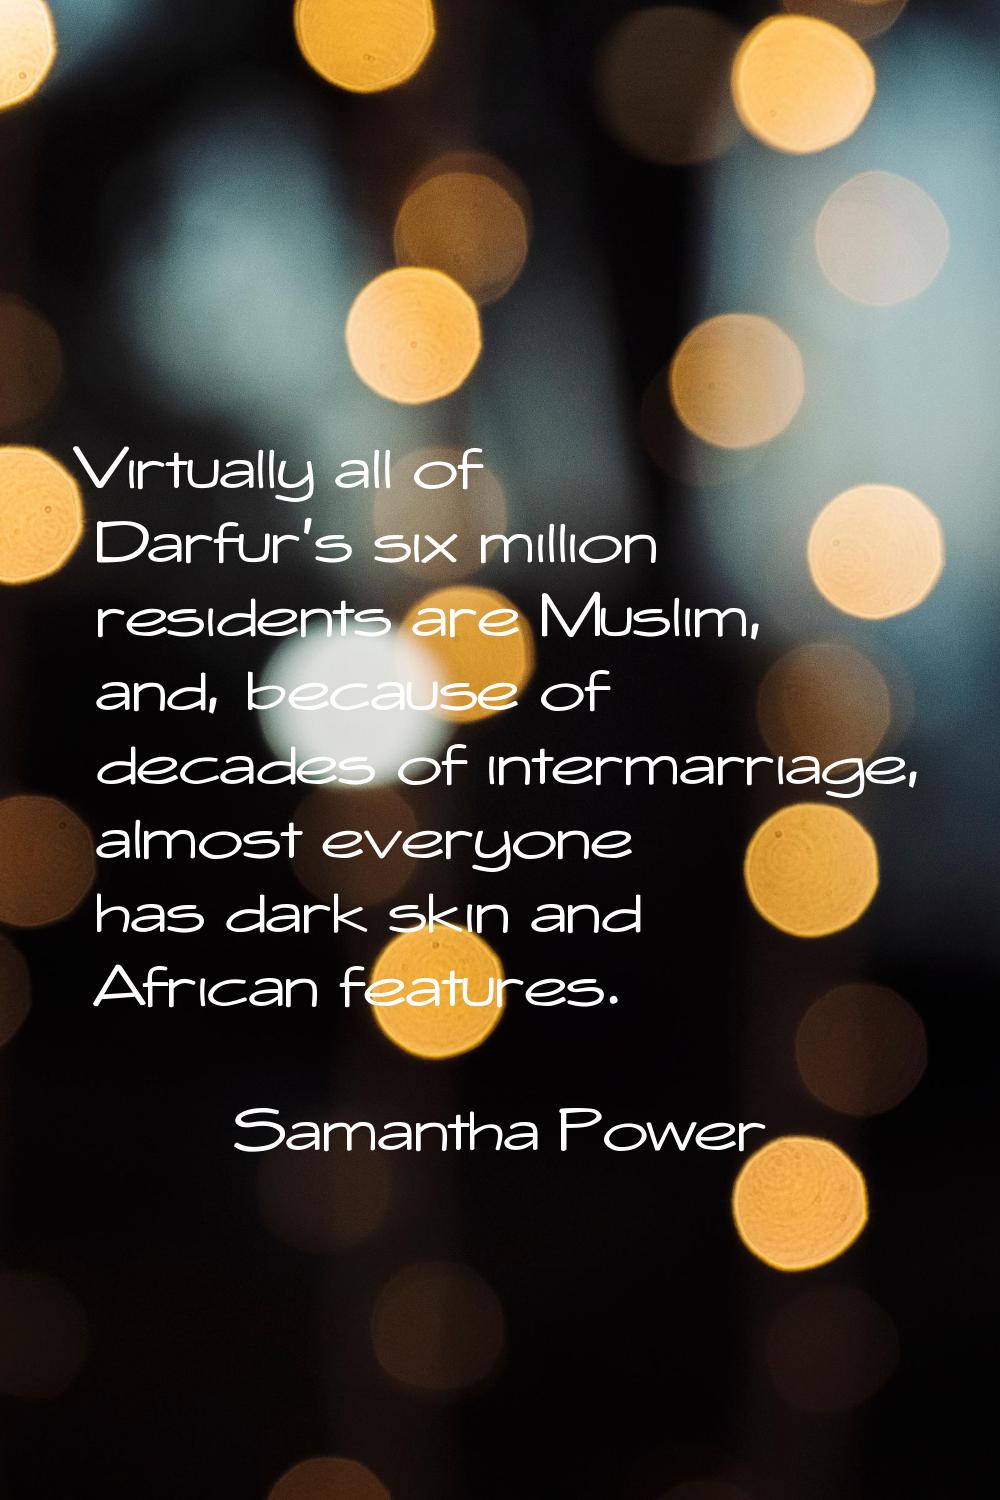 Virtually all of Darfur's six million residents are Muslim, and, because of decades of intermarriag